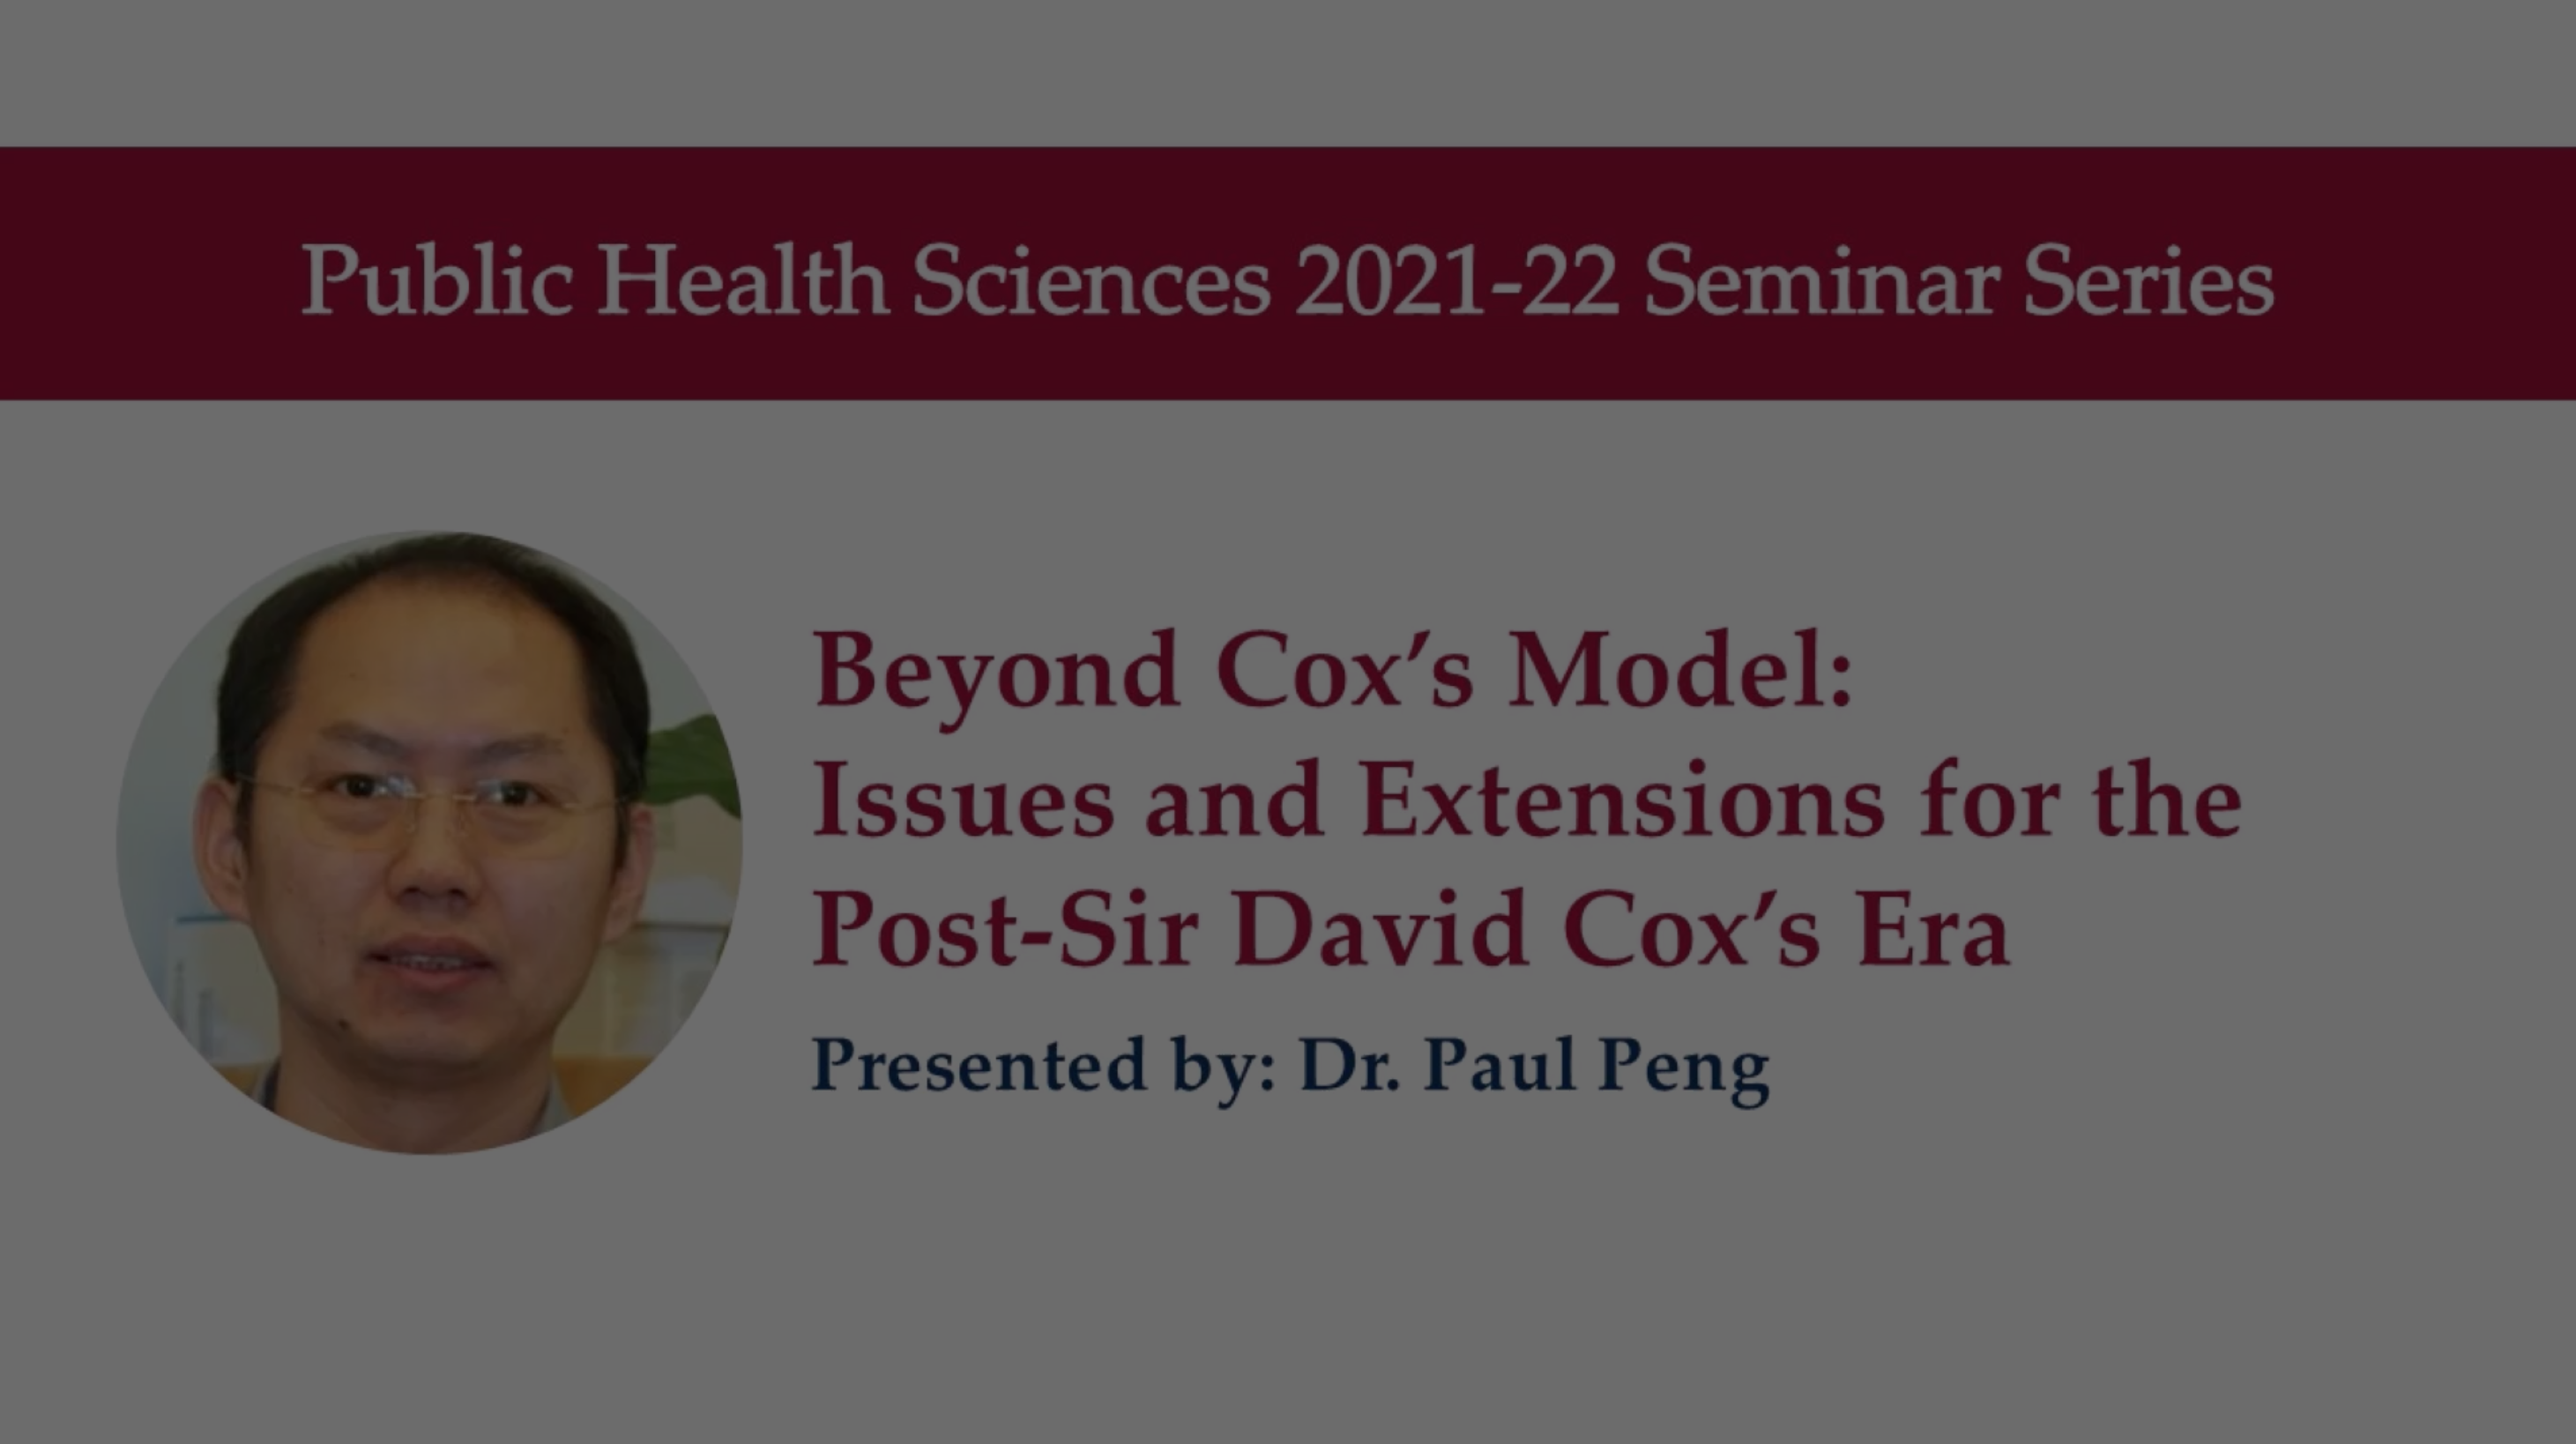 March 2, 2022 | Beyond Cox's Model: Issues and Extensions for Post-Sir David Cox's Era